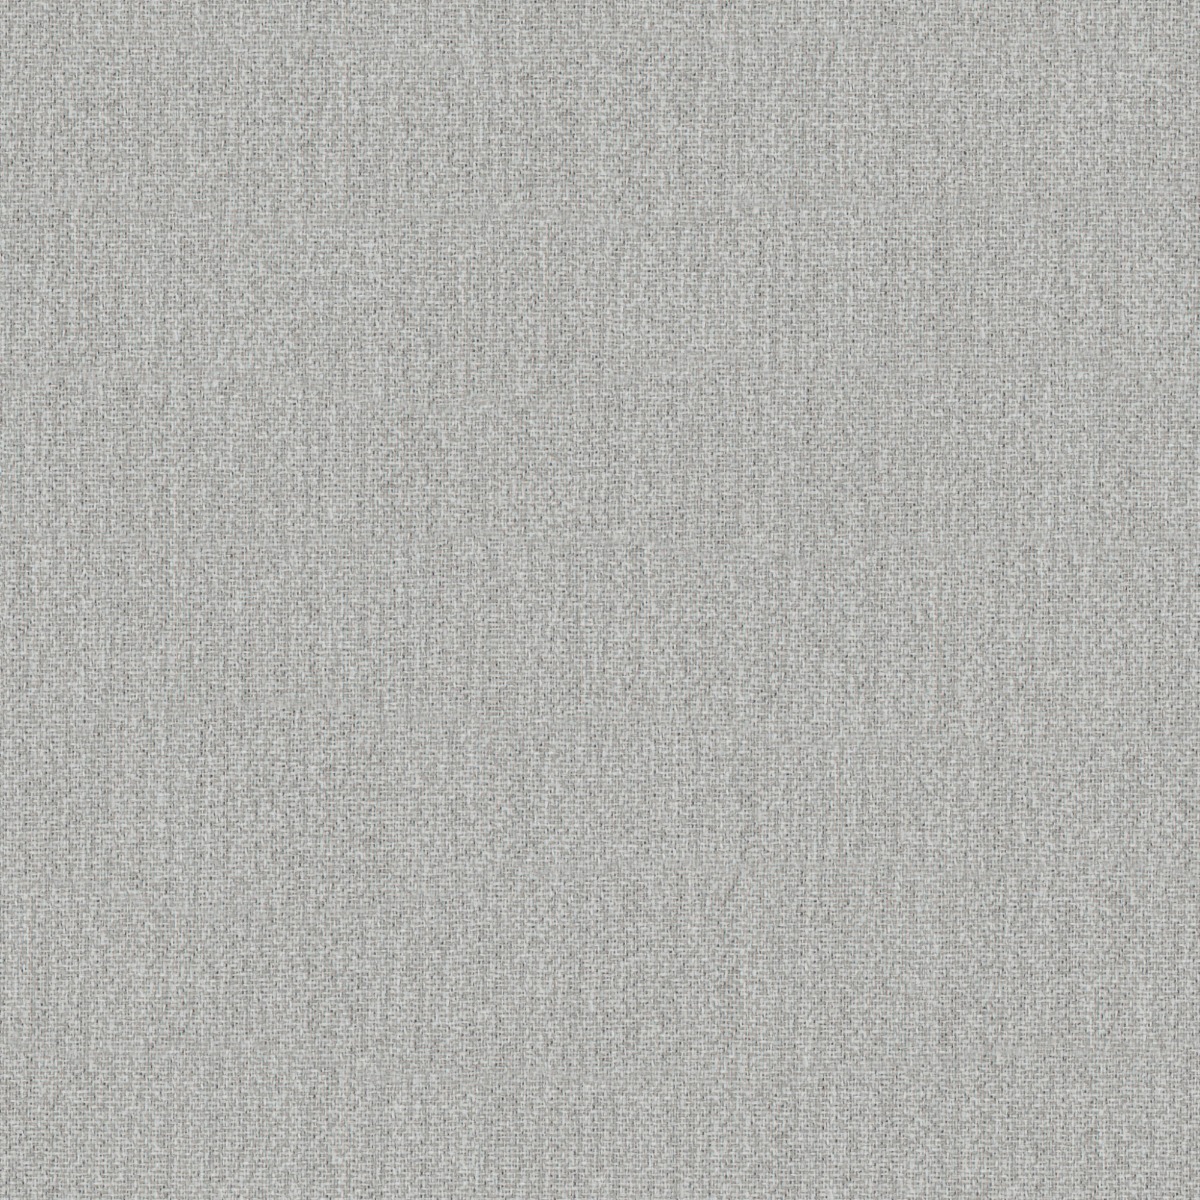 A seamless fabric texture with plain grey dimout units arranged in a None pattern